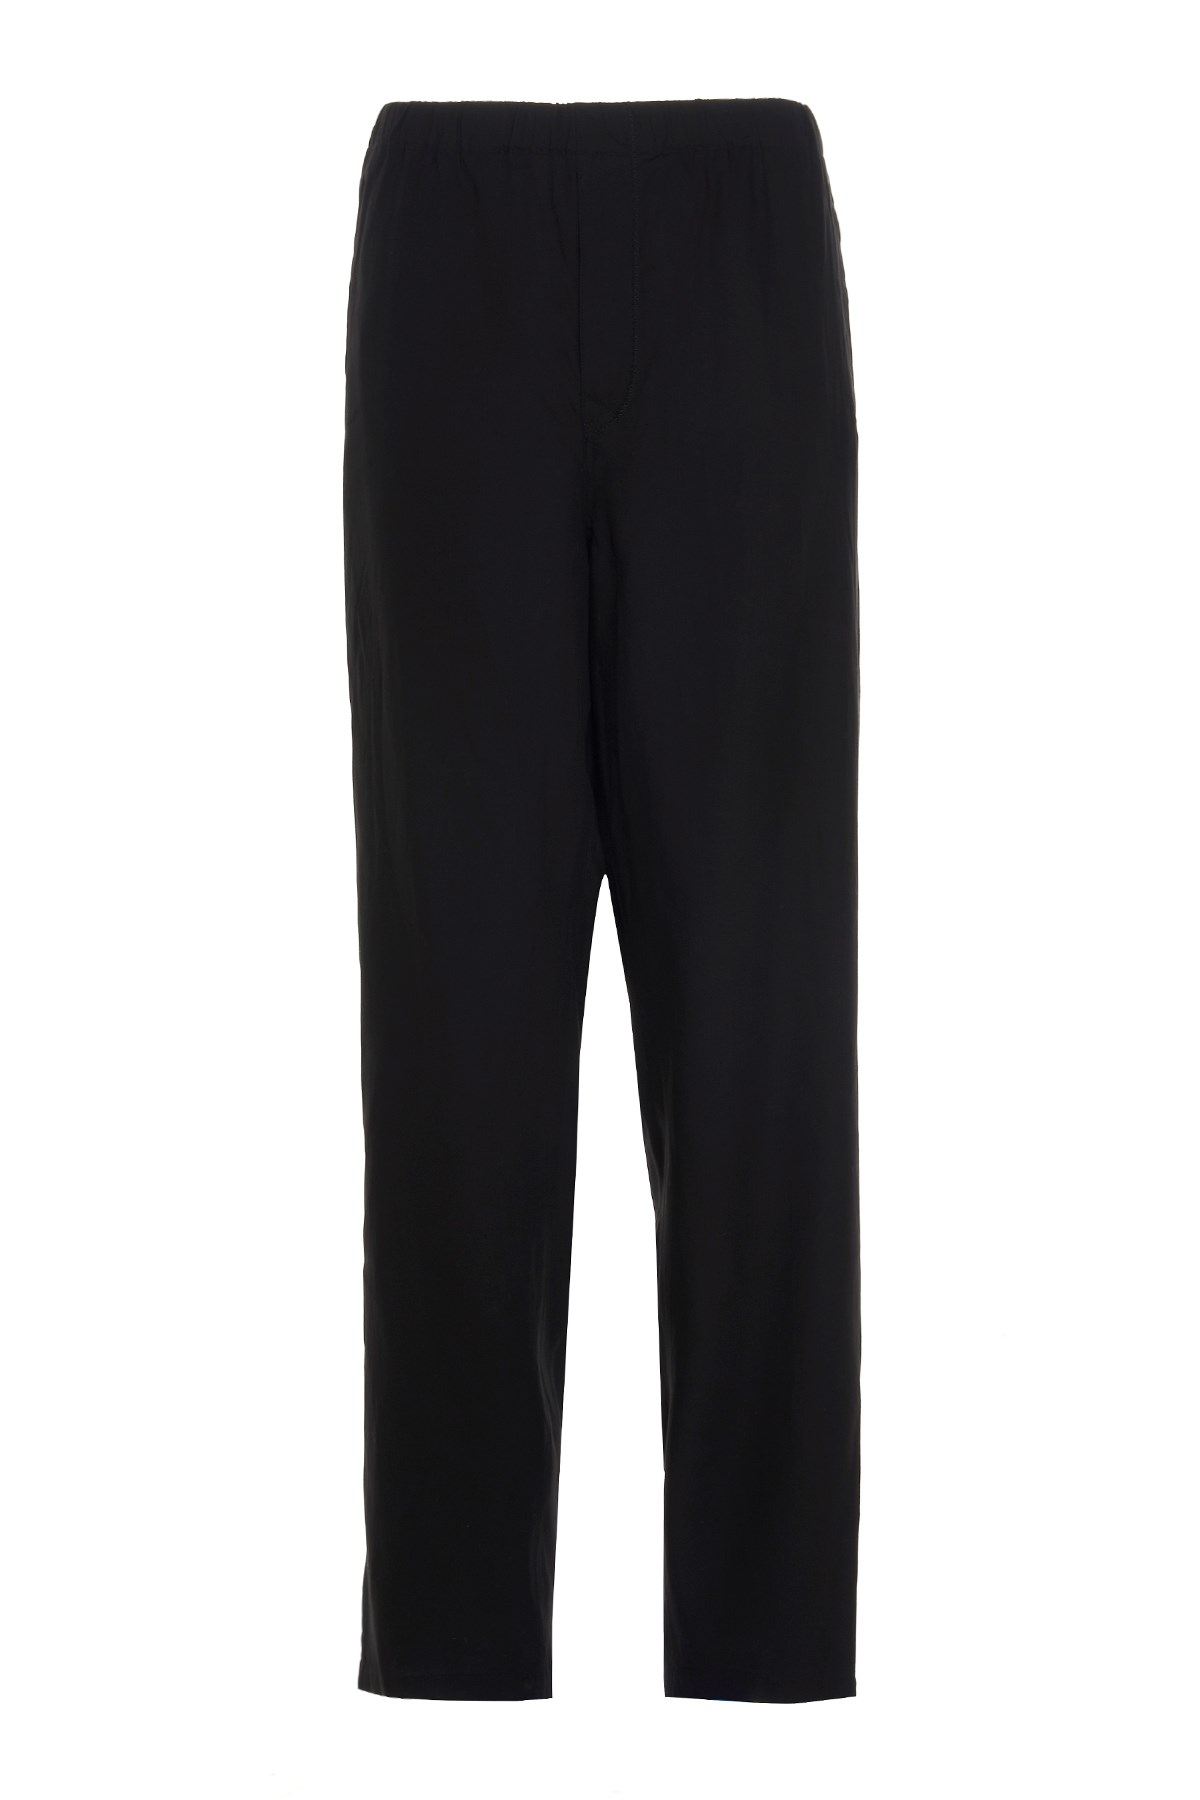 UNDERCOVER Loose Trousers